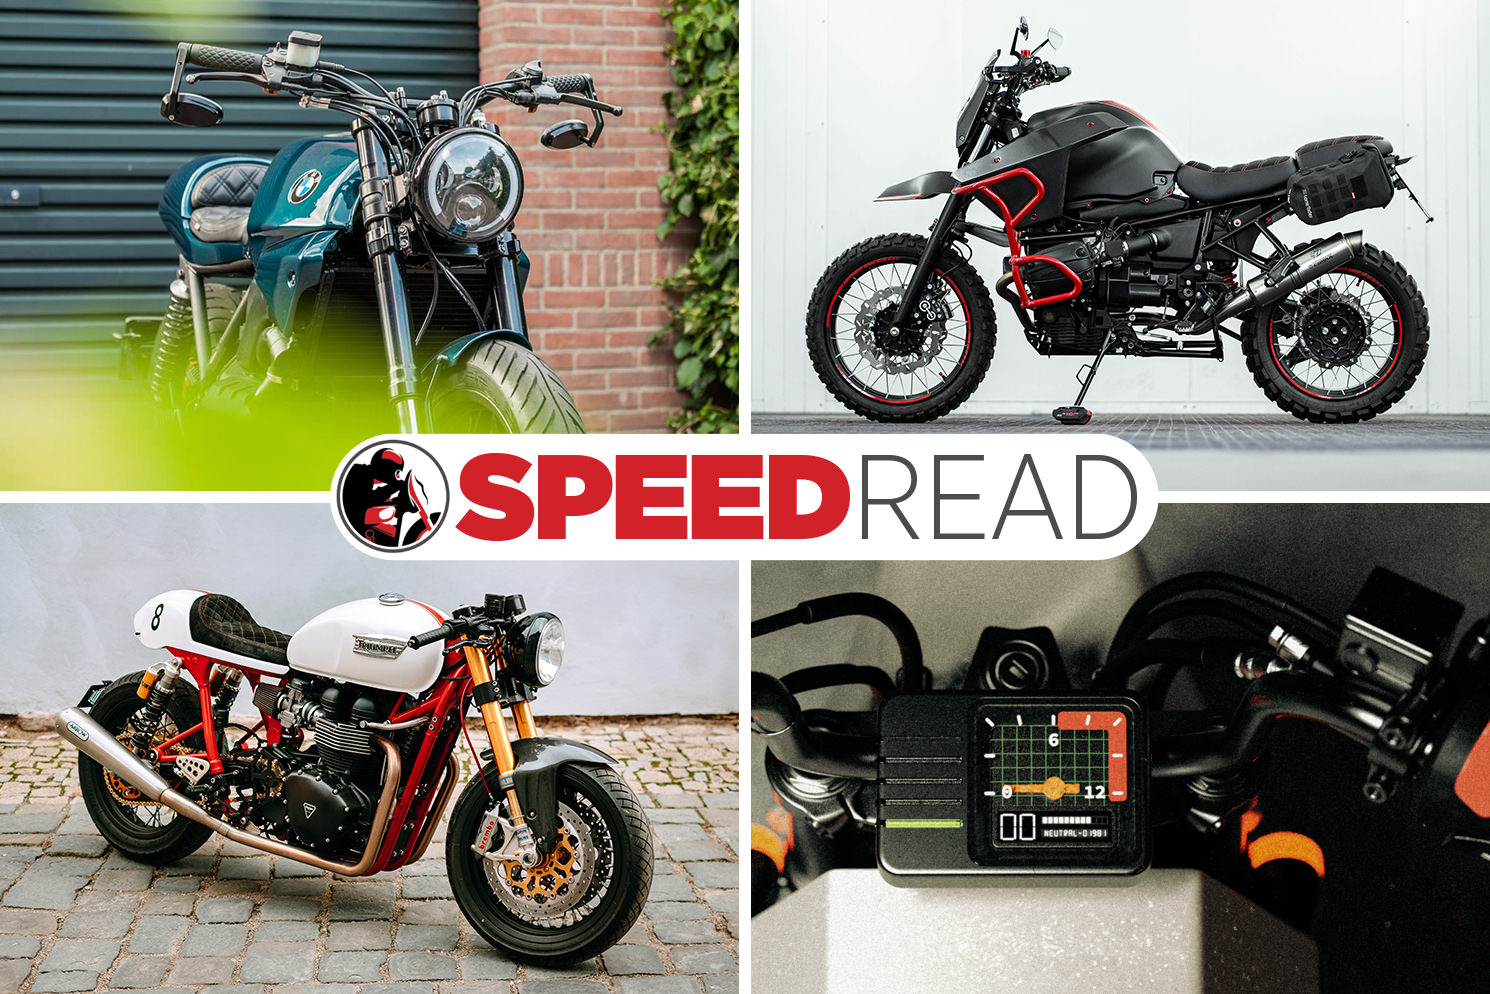 The latest motorcycle news, customs and digital concepts